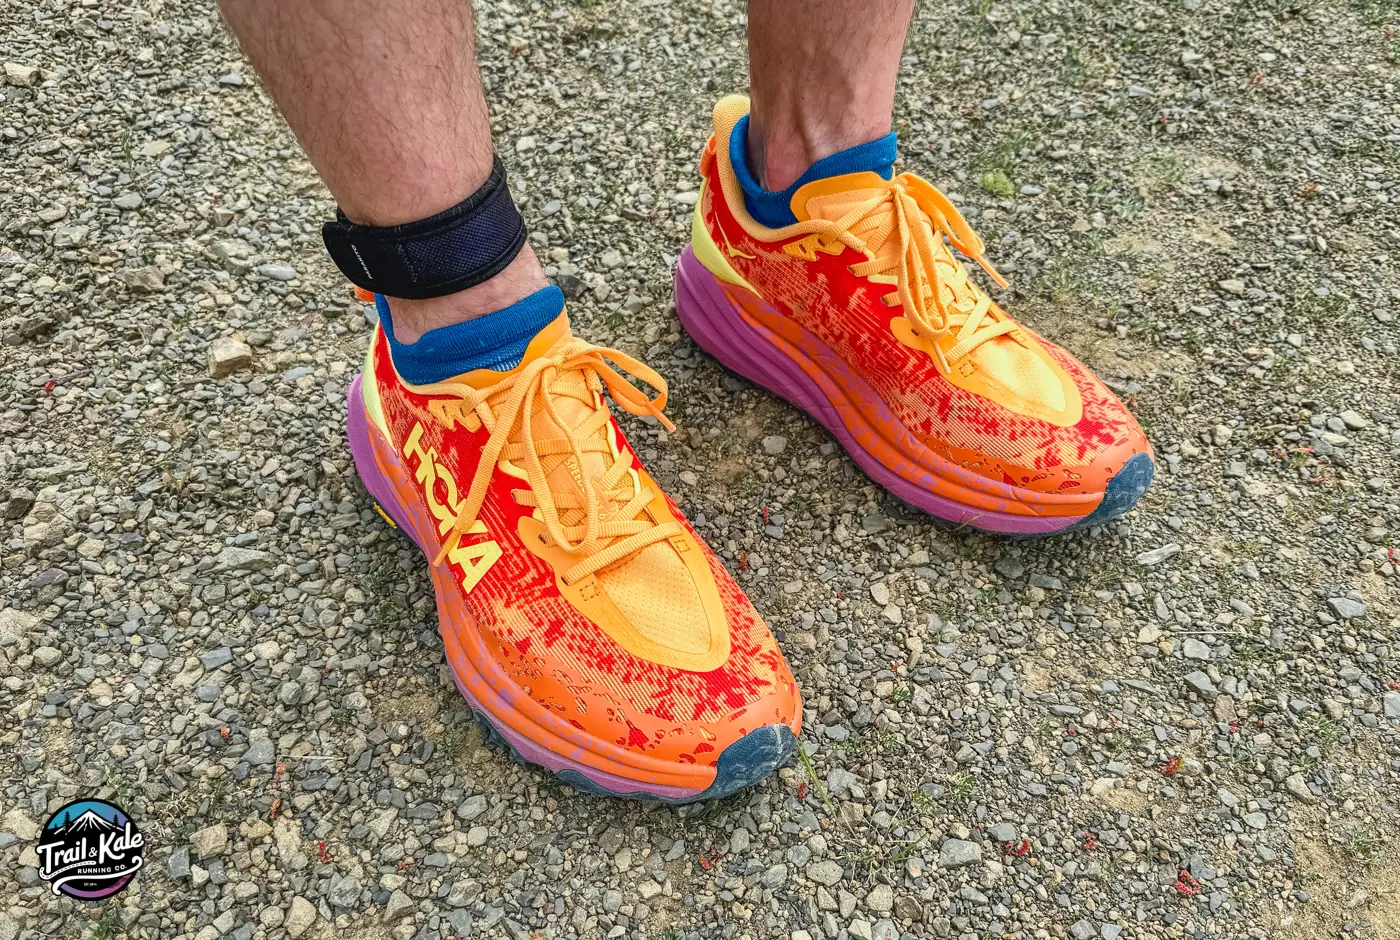 Hoka Speedgoat 6 Review: Are They Still The G.O.A.T.?